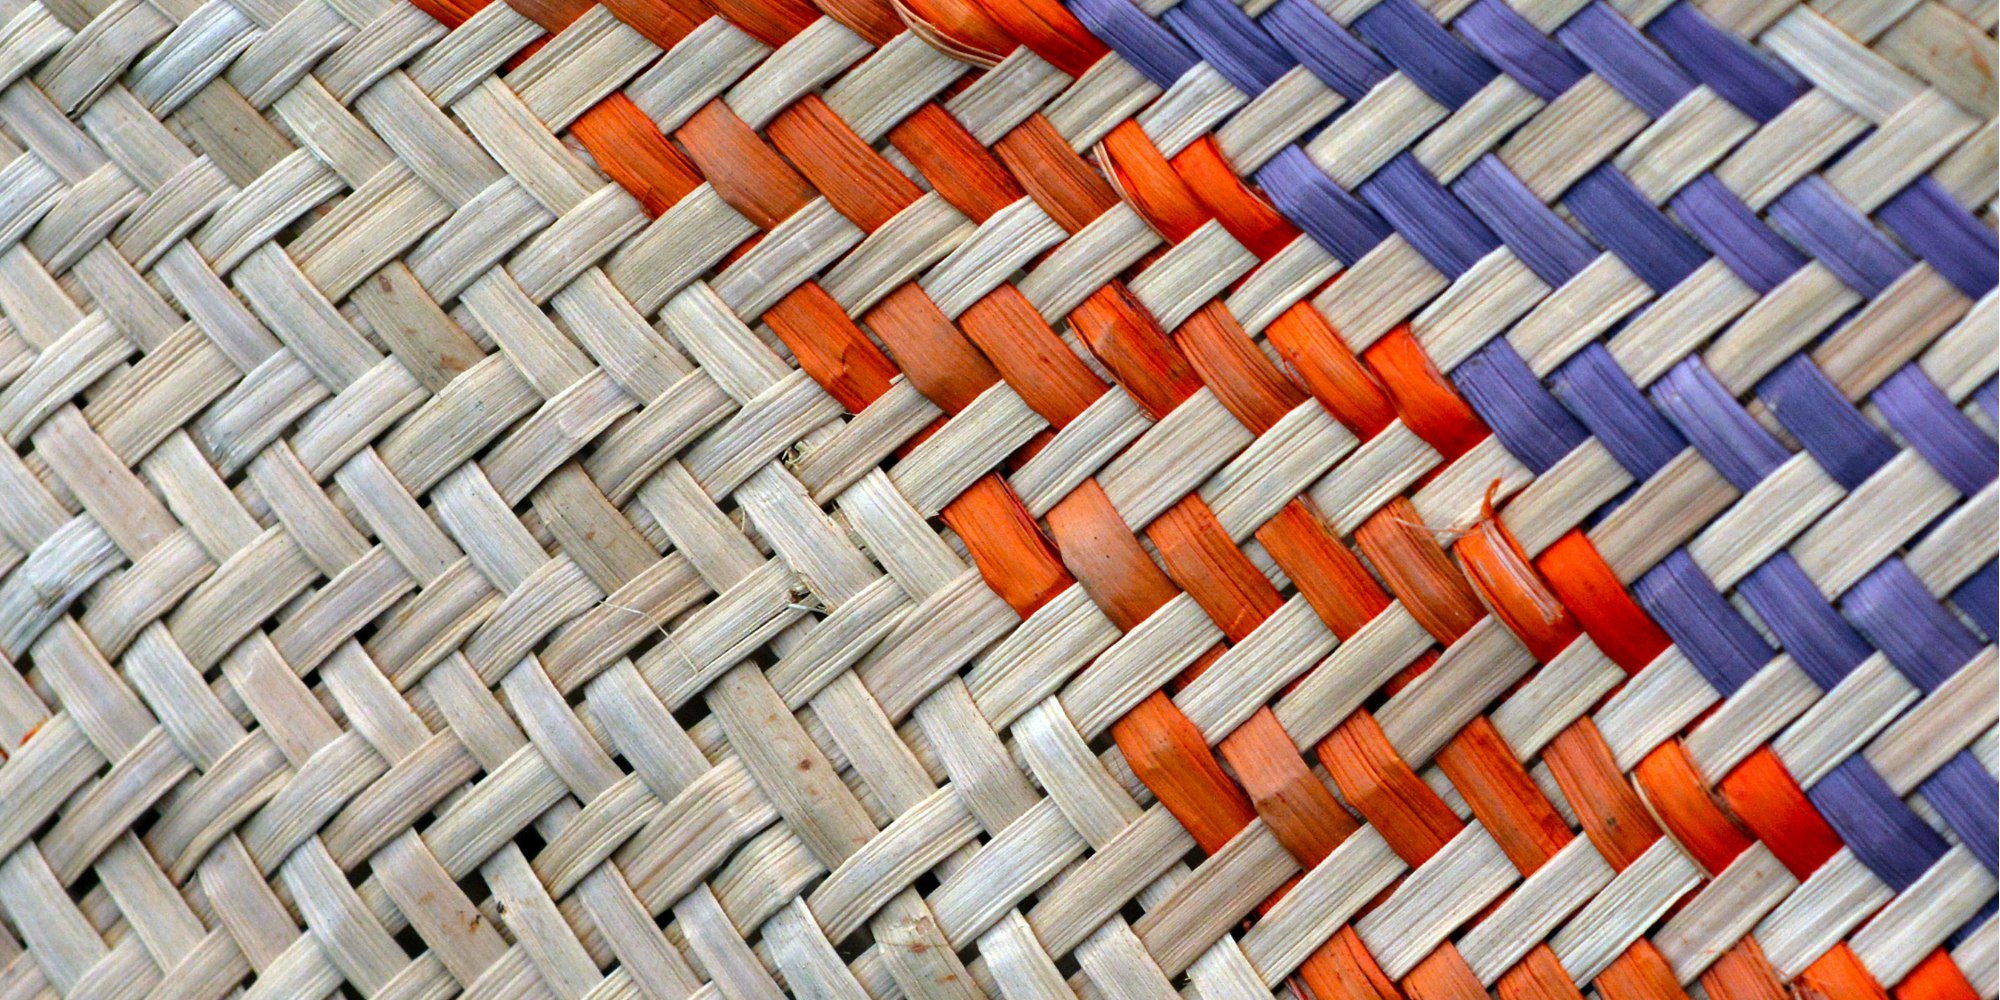 Woven kete with orange and blue flax